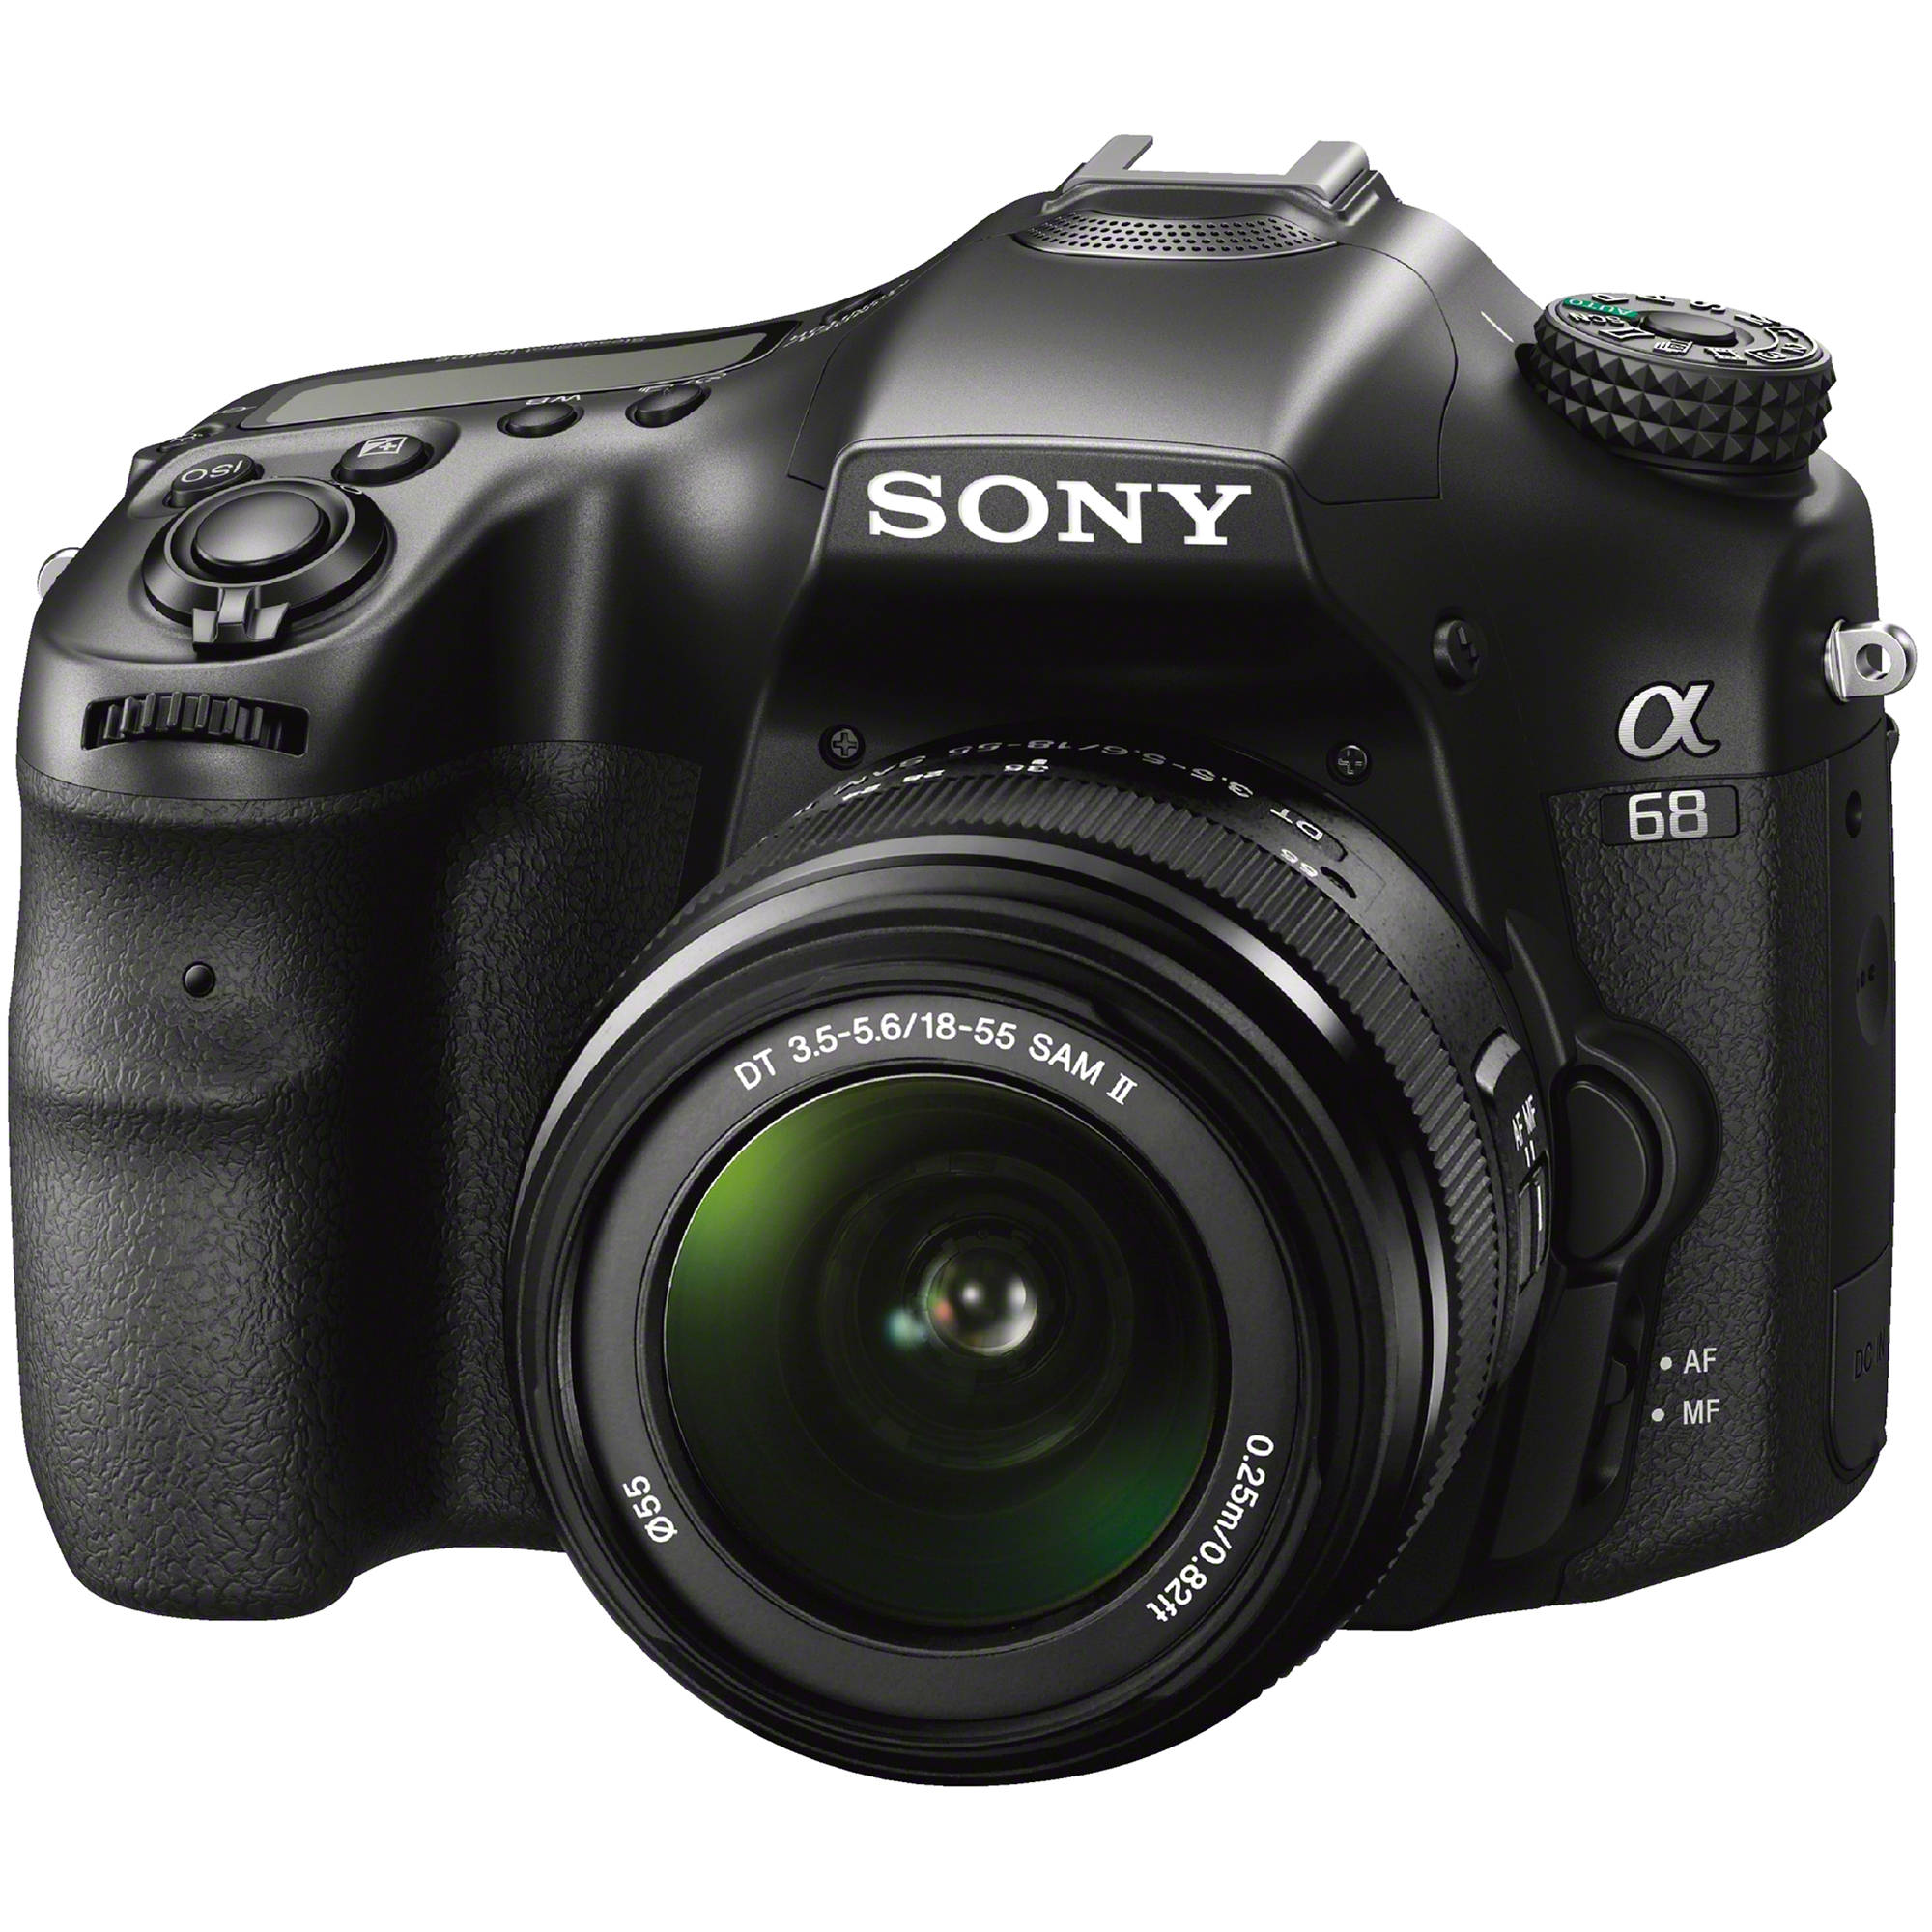 SONY ALPHA 68. YOUR FIRST SLR READY FOR ACTION